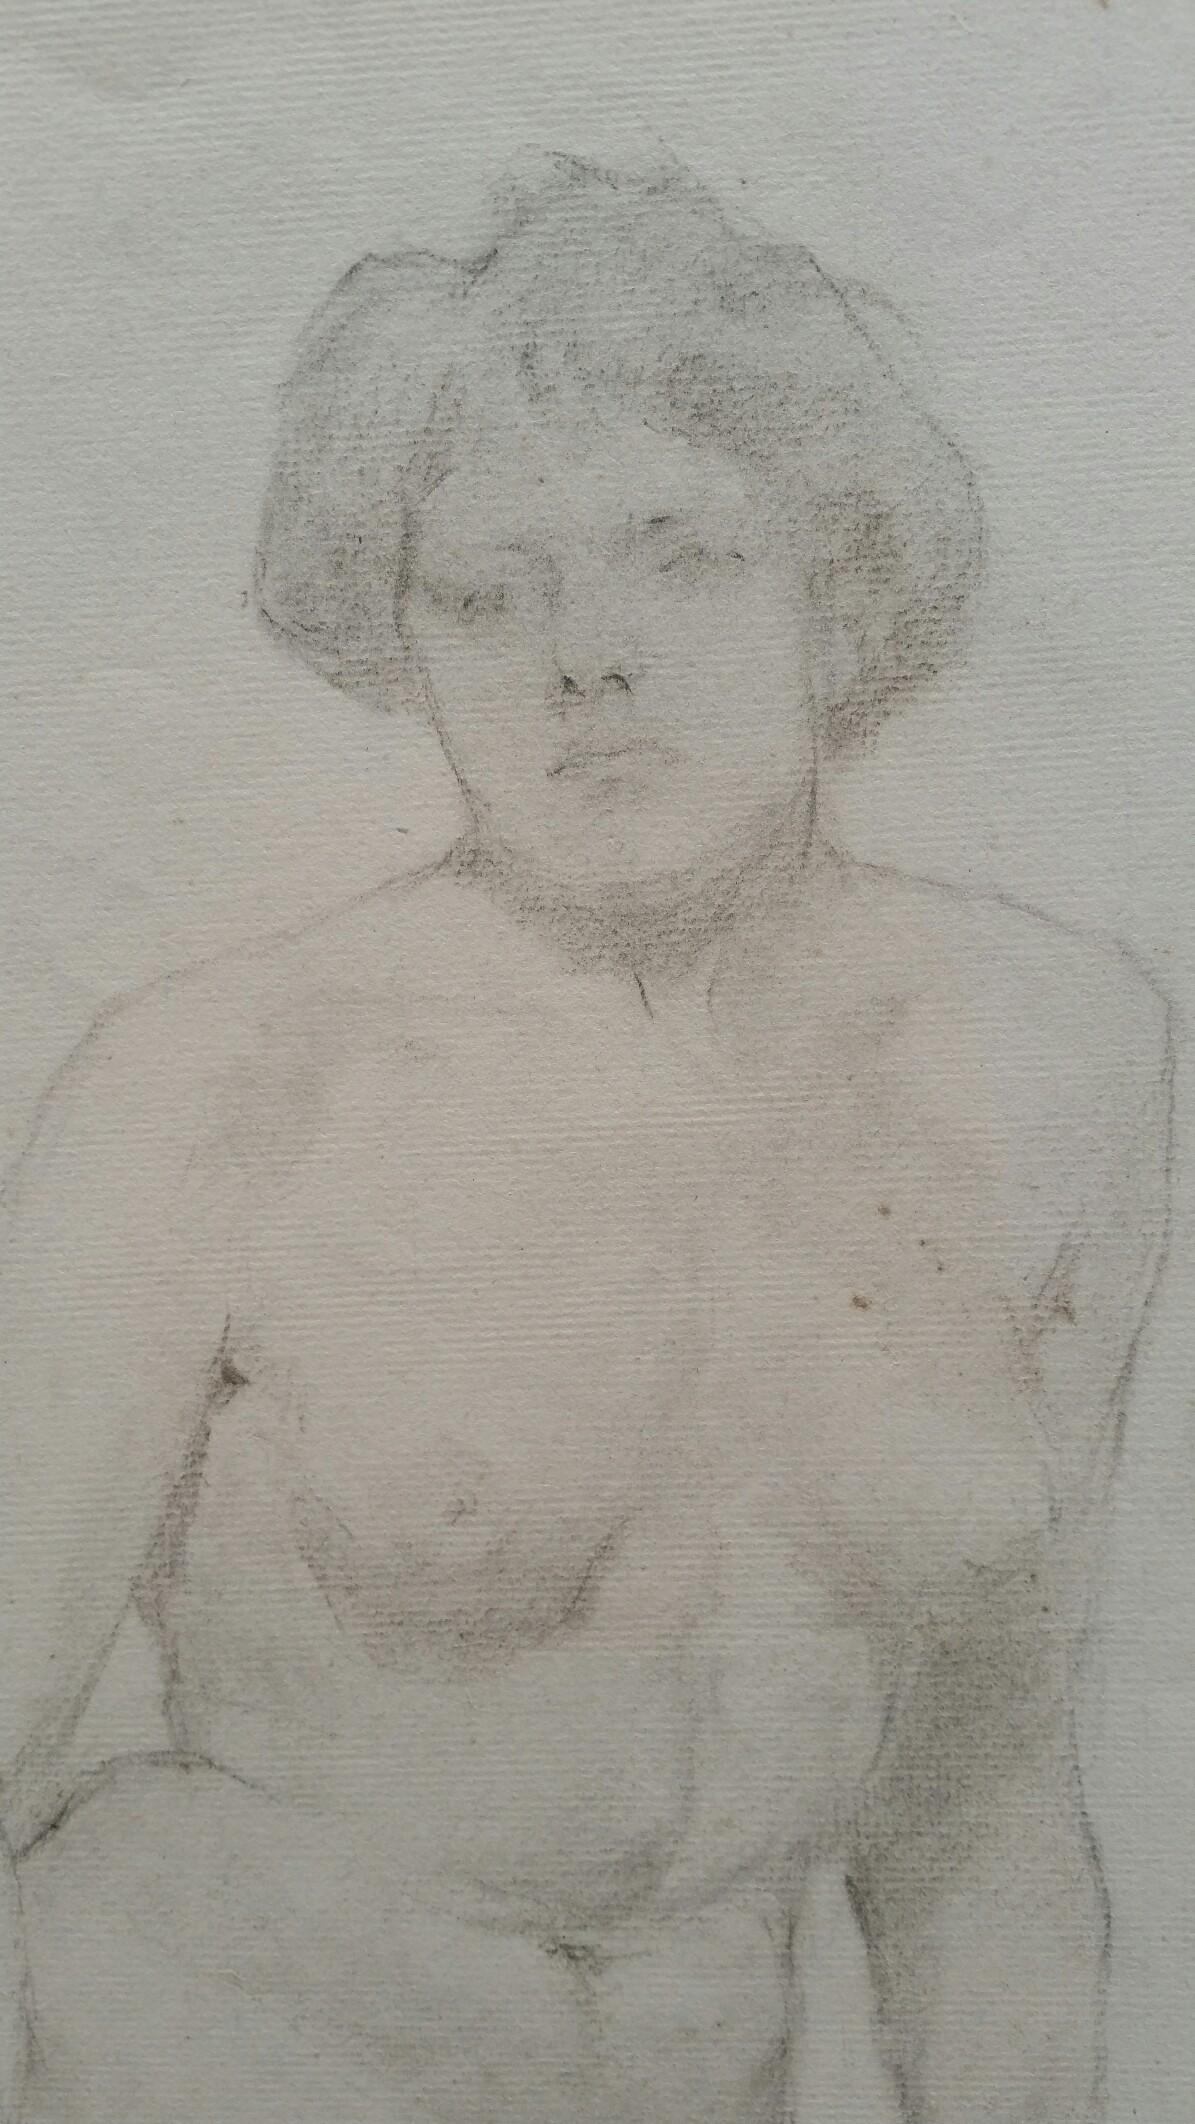 English Graphite Sketch of a Female Nude, Seated on Floor
by Henry George Moon (British 1857-1905)
on off white artists paper, unframed
measurements: sheet 18.75 x 12 inches 

provenance: from the artists estate

Condition report: pin holes to